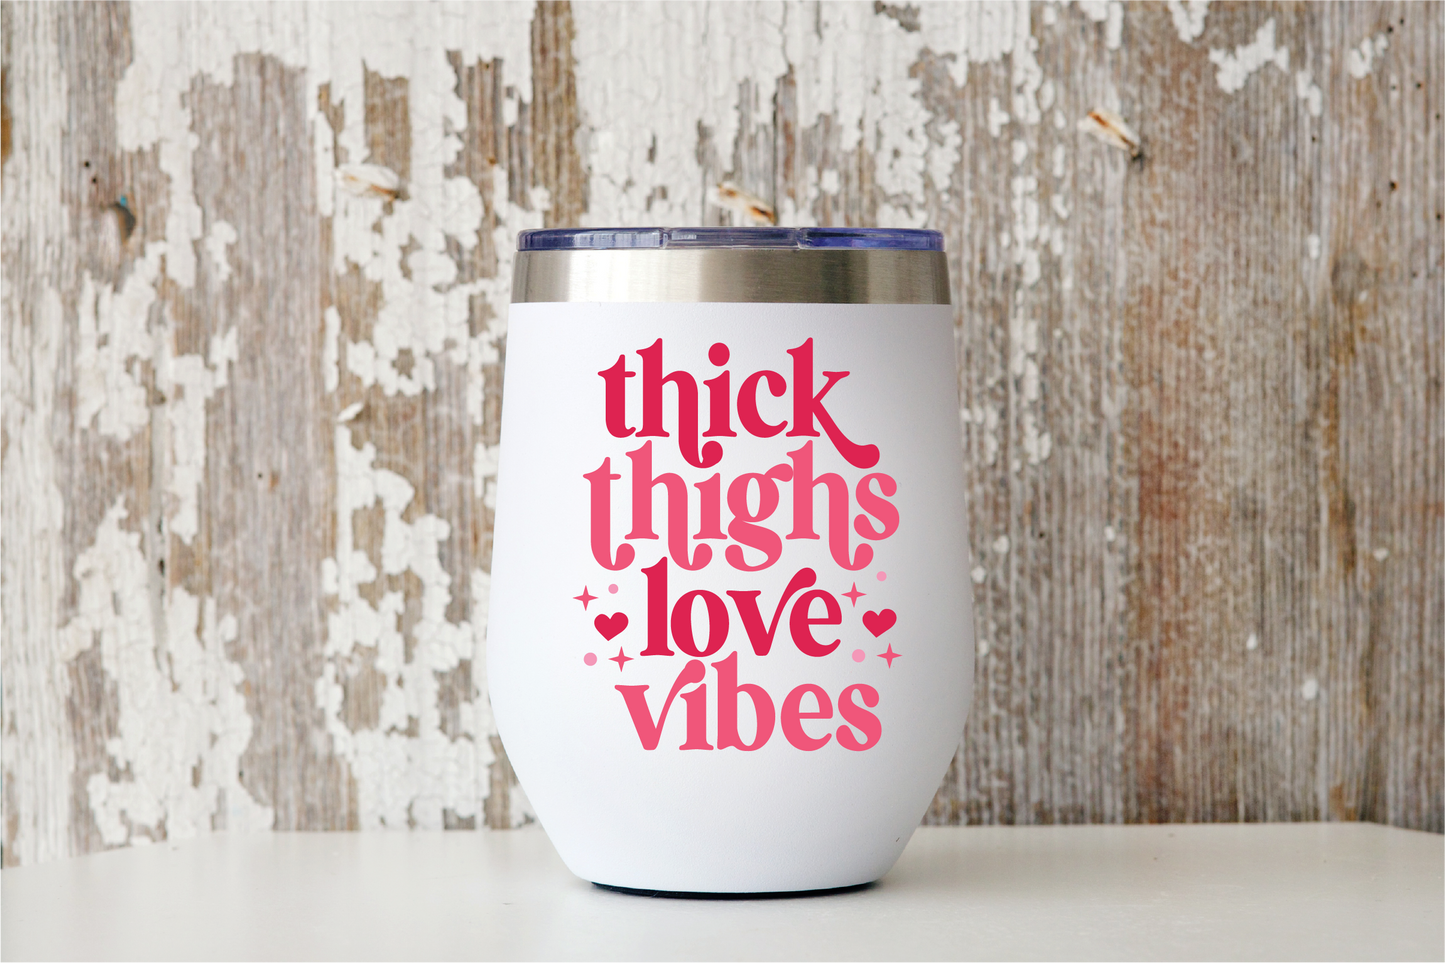 Thick Thighs Love Vibes Retro Modern SVG Cut File Digital Download